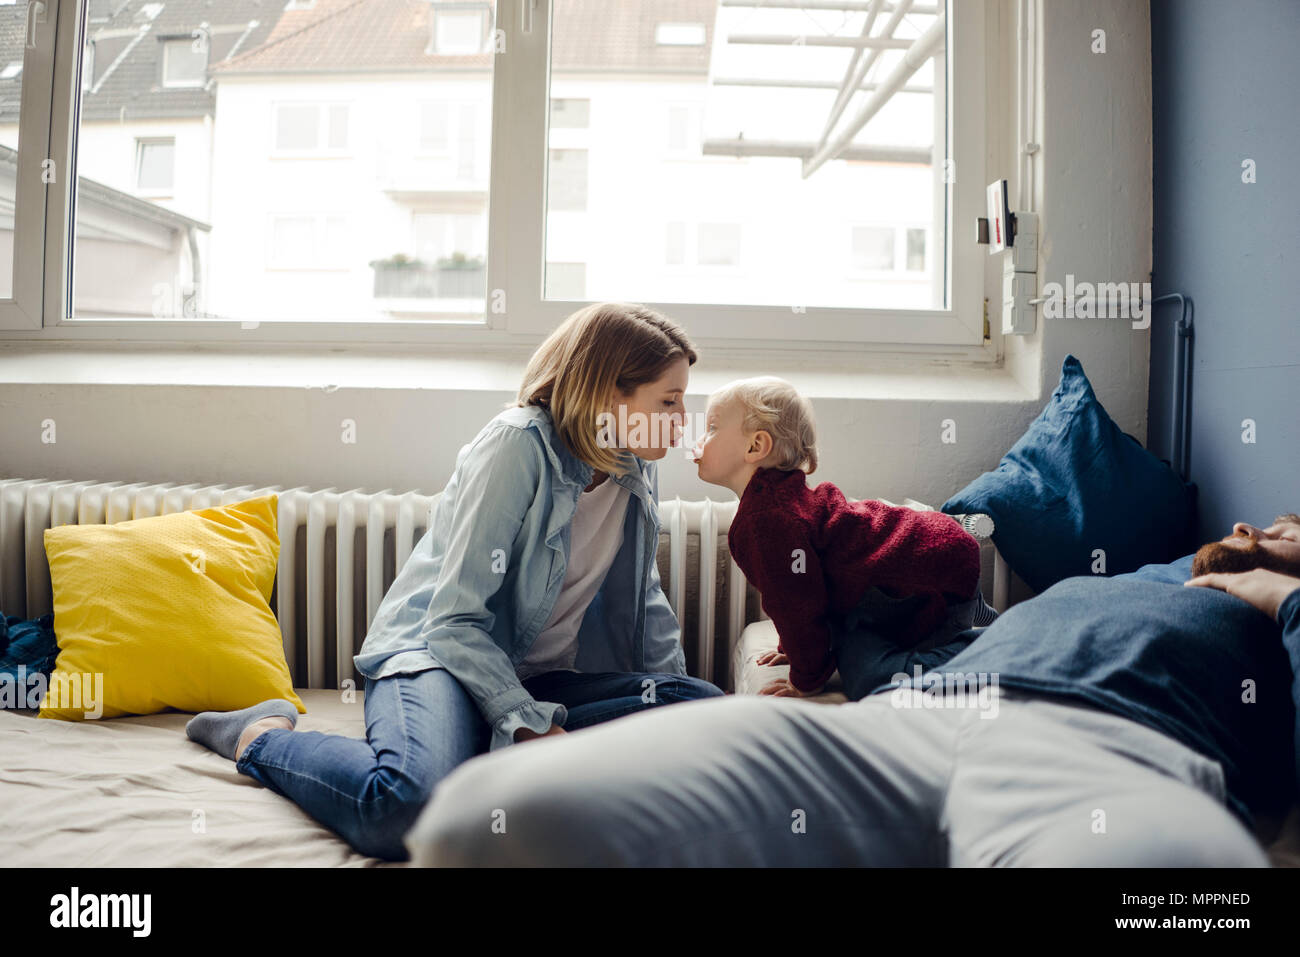 Family relaxing at home on the sofa, mother kissing baby son Stock Photo